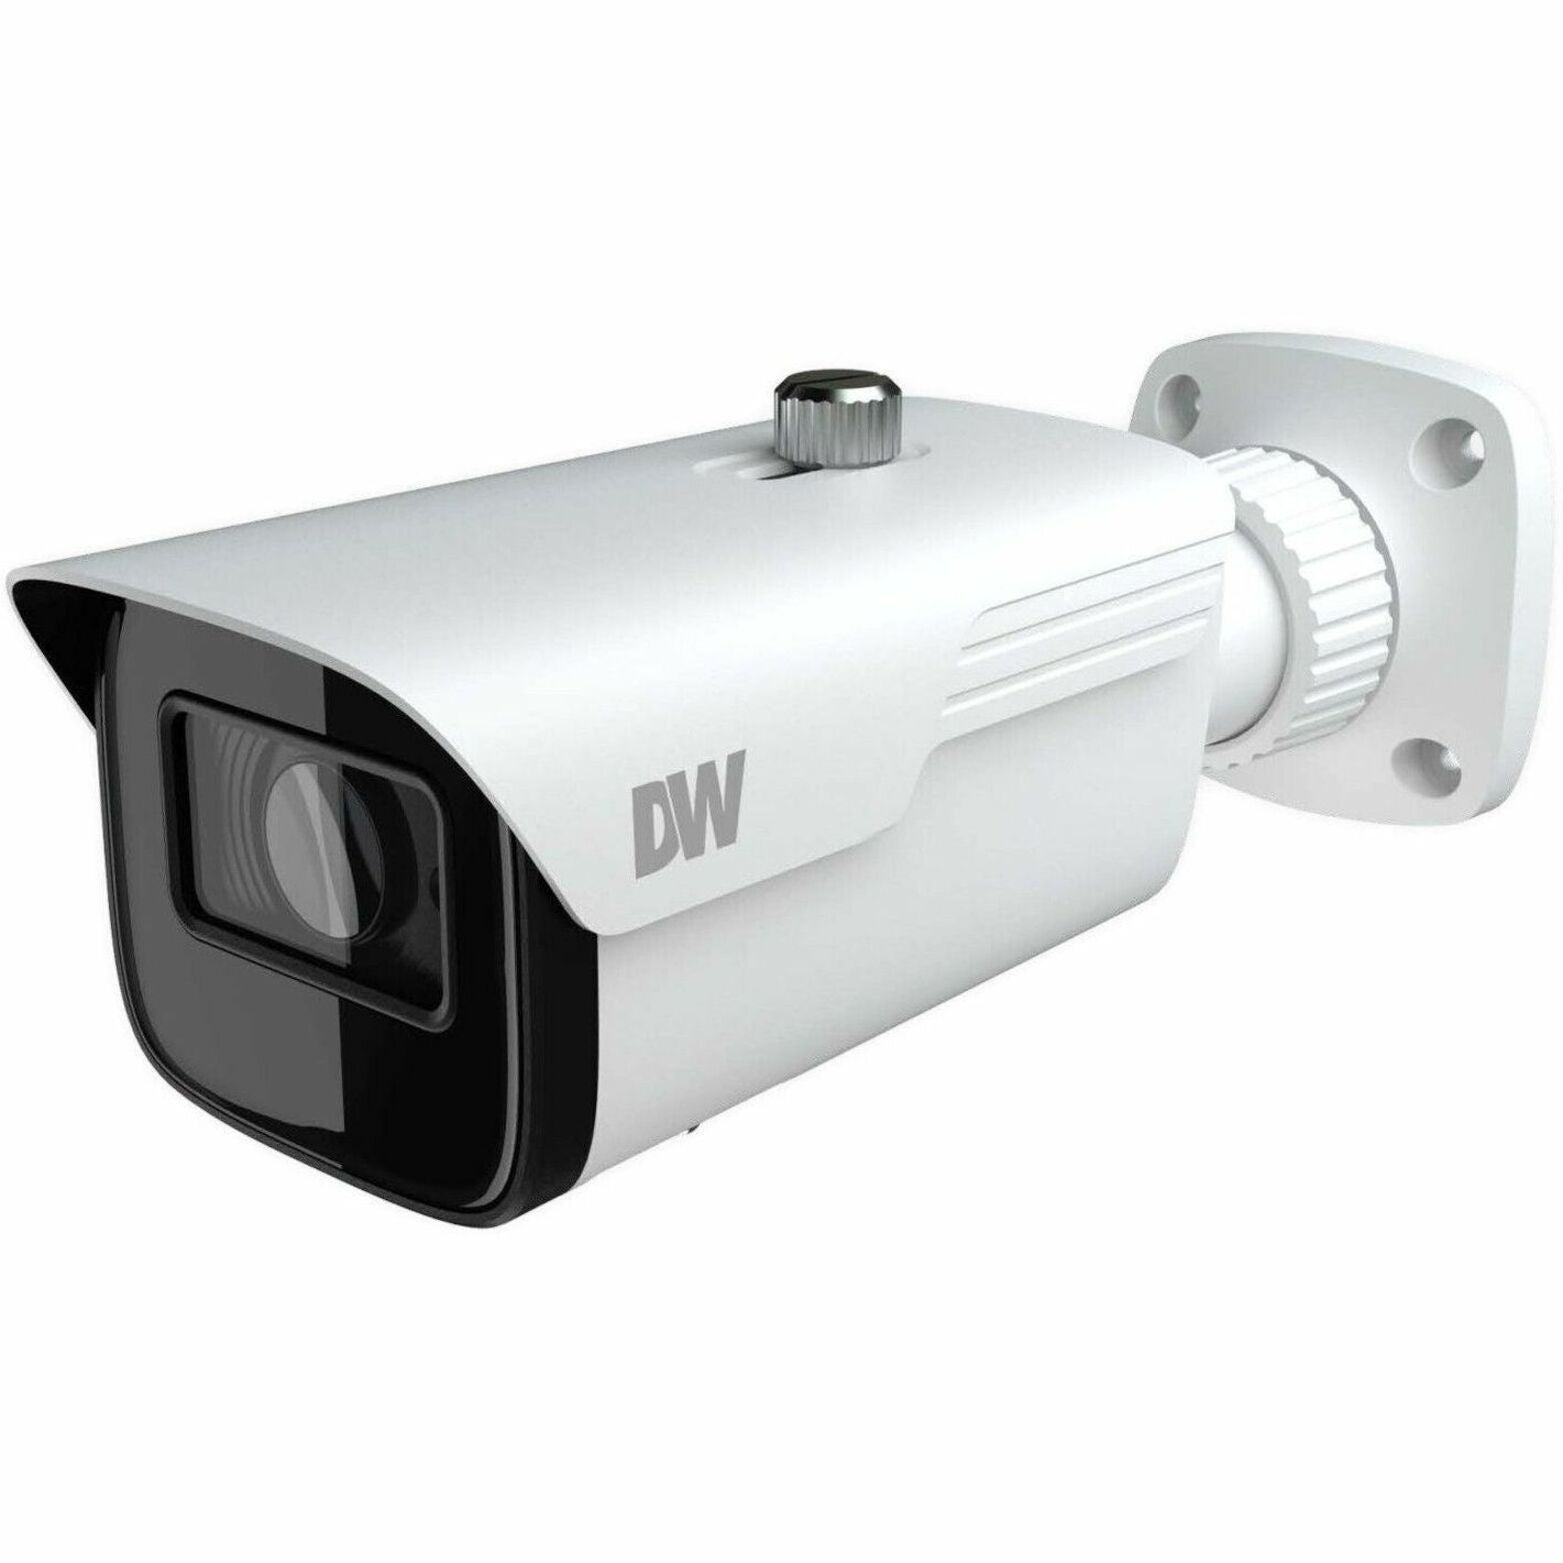 MEGApix 4MP Bullet IP Camera with Fixed Lens and IR (DWC-VSBD04BI)